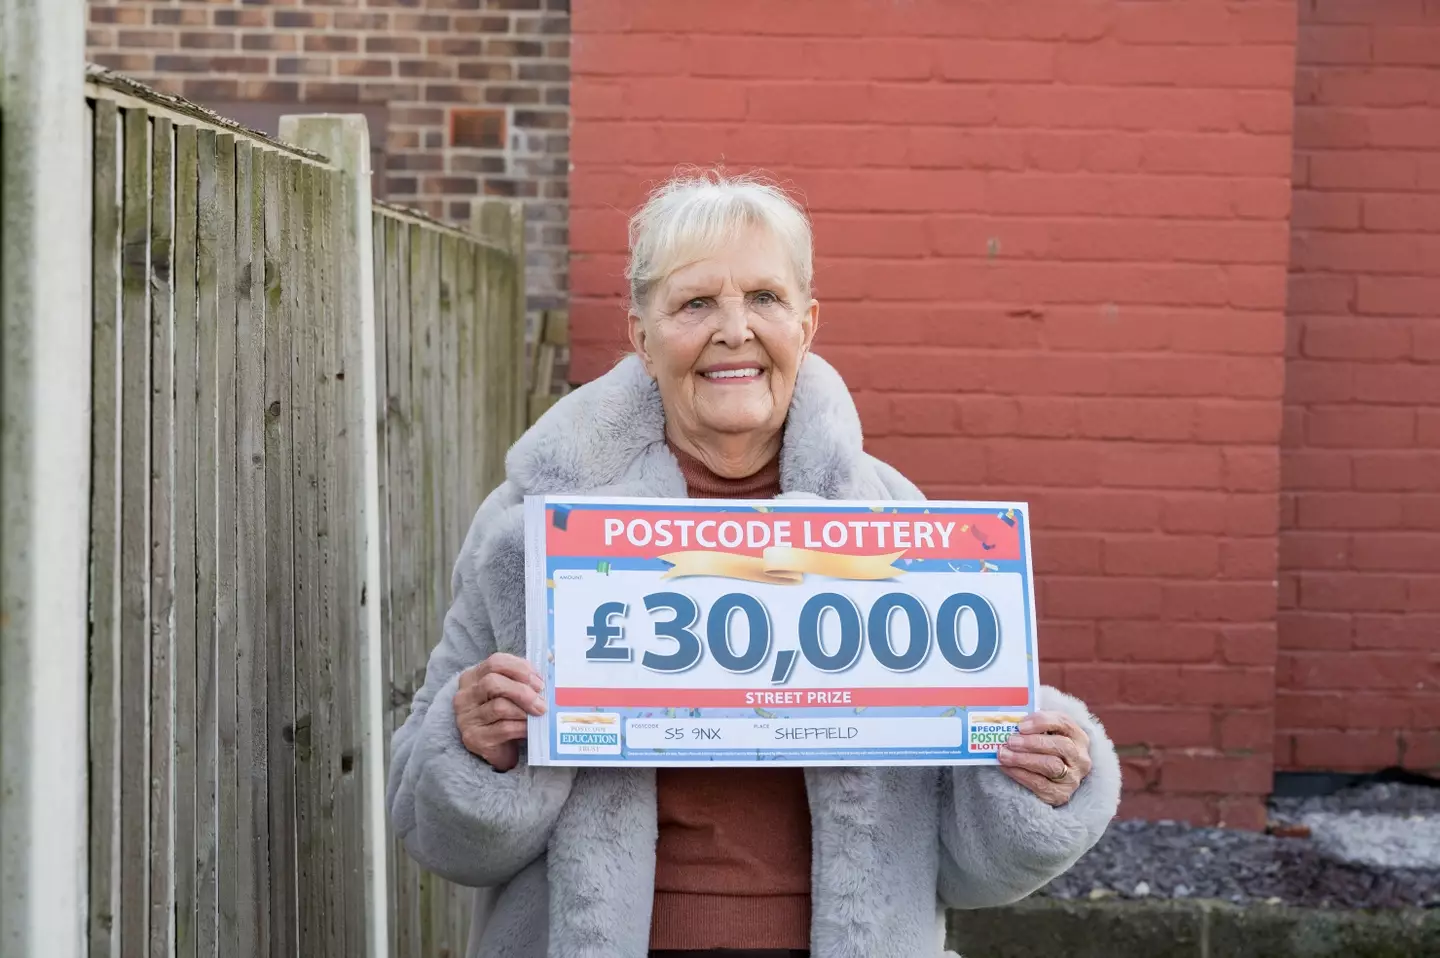 Jan looking thrilled with her Postcode Lottery winnings.